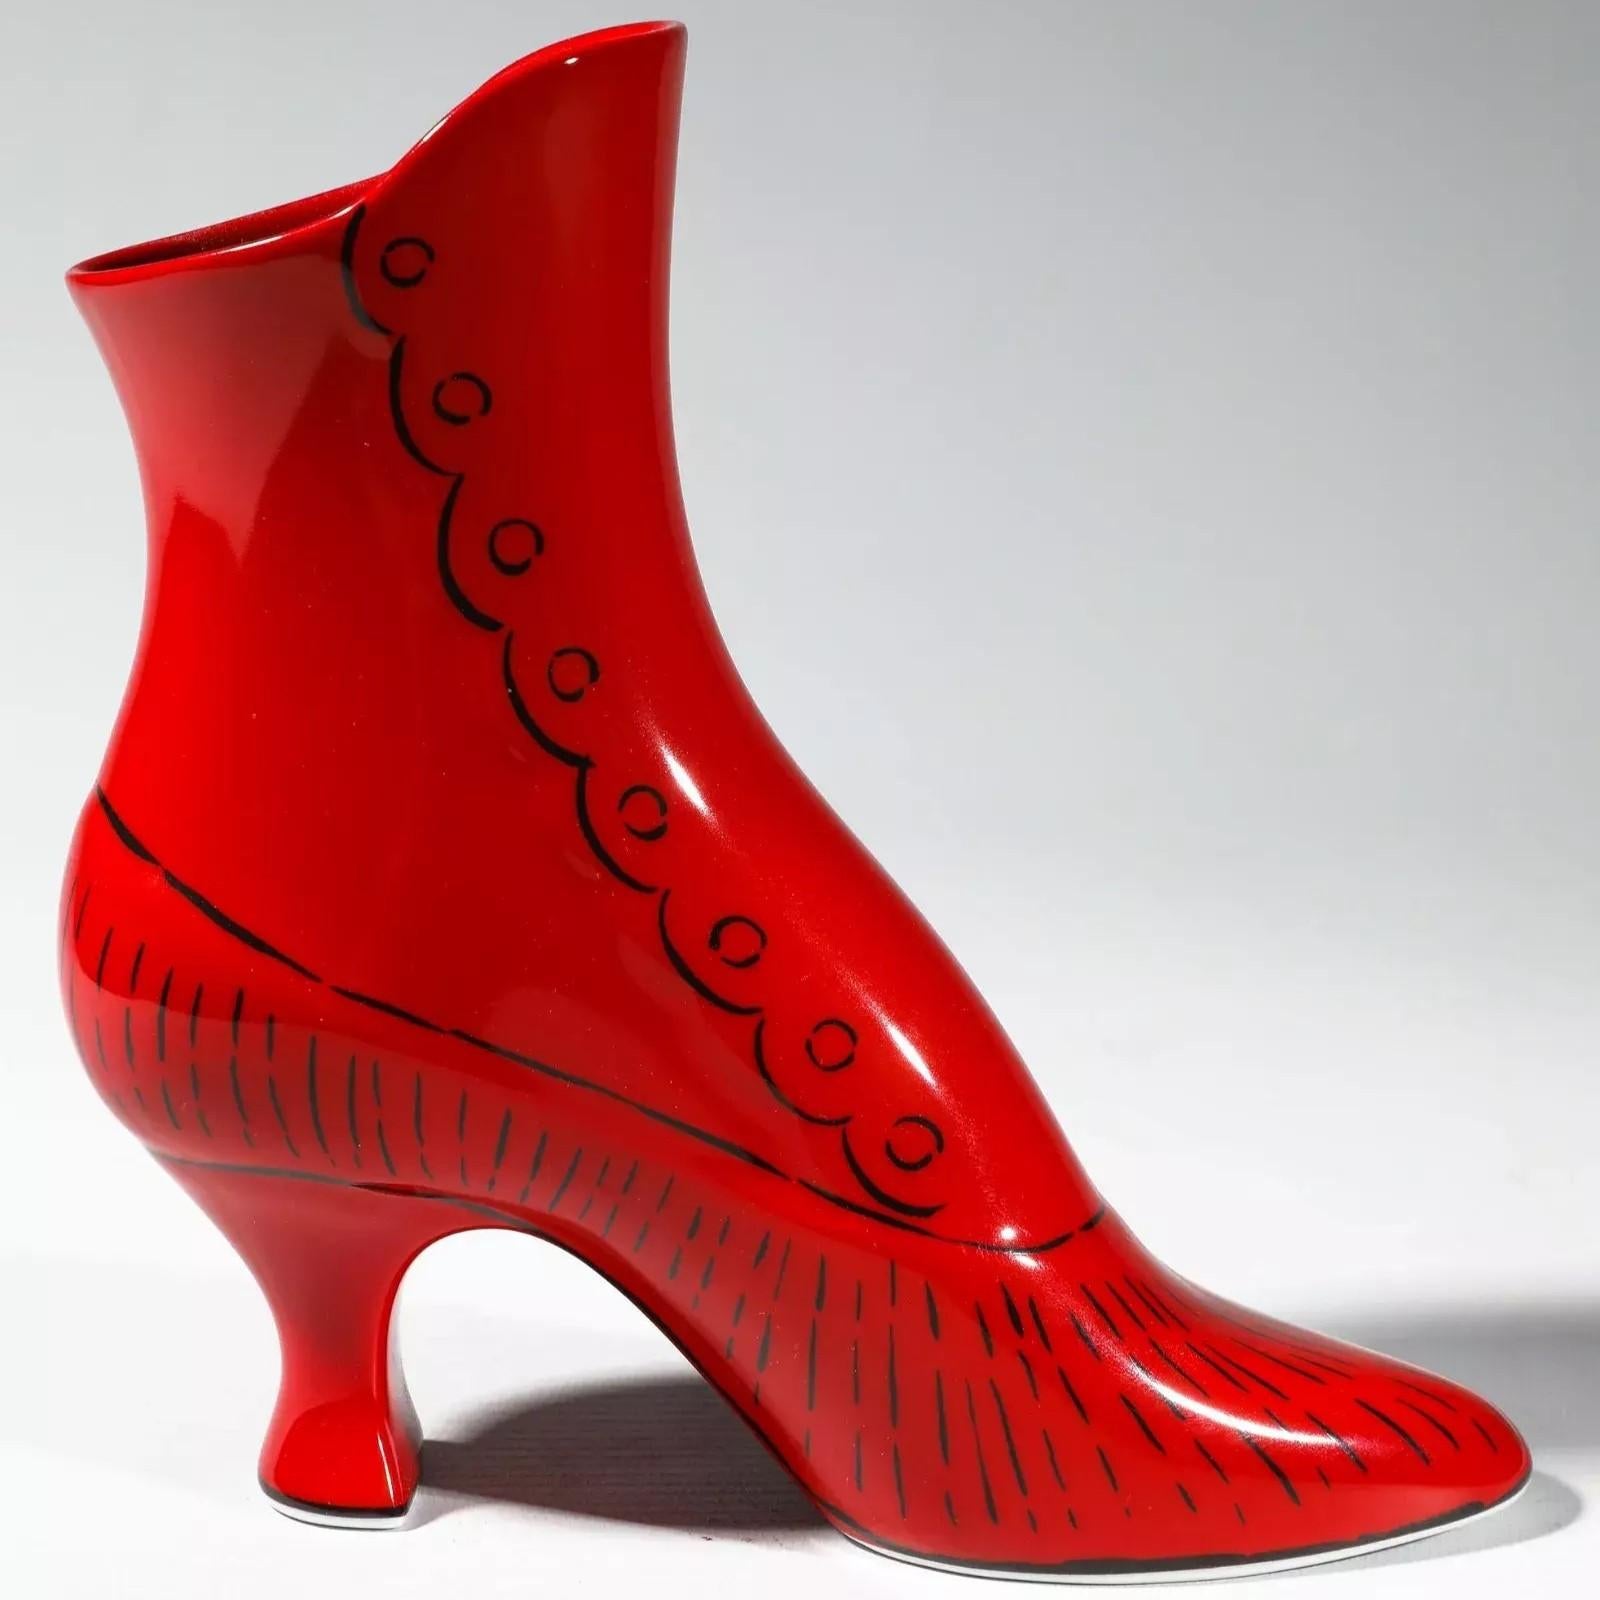 Andy Warhol, Red Christmas Shoe -Porcelain, Contemporary, Edition, Pop Art, Gift - Print by (after) Andy Warhol